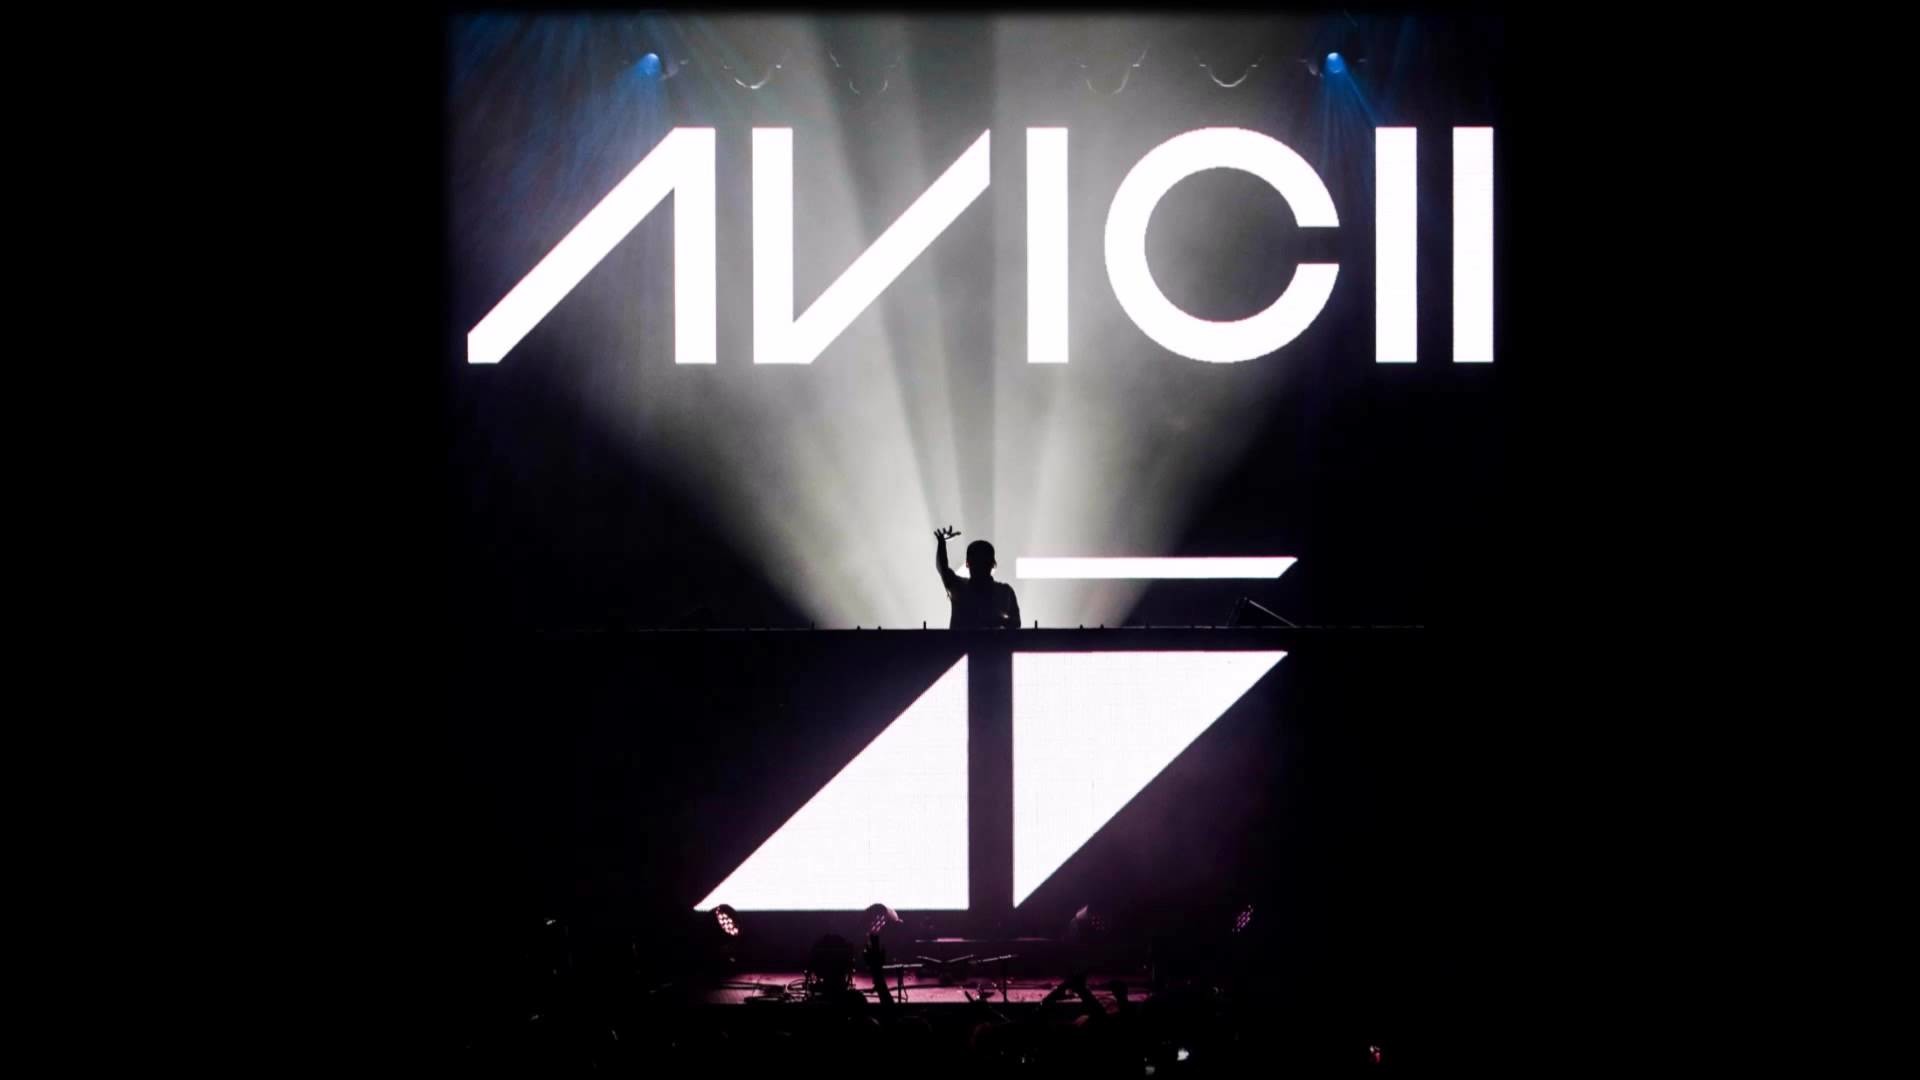 Live DJ Avicii Wallpaper  Gallery Yopriceville  HighQuality Free Images  and Transparent PNG Clipart